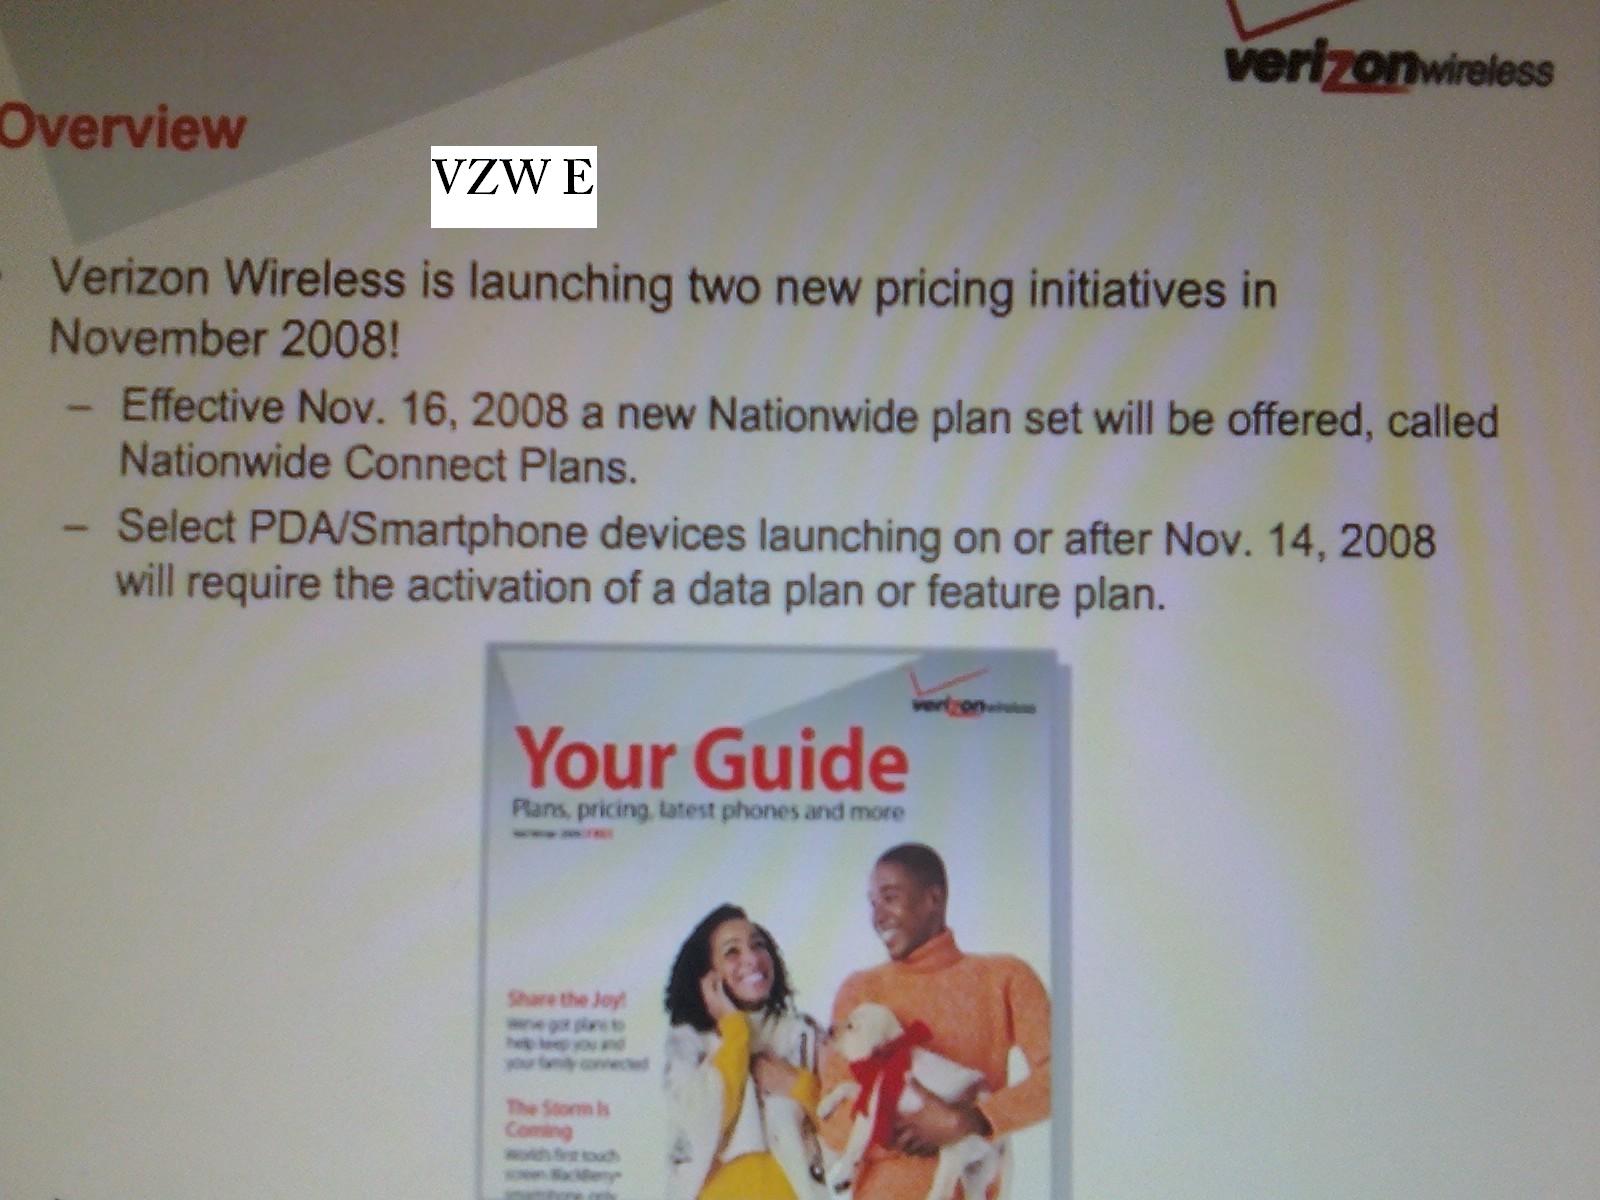 Verizon to Offer New Nationwide Connect Plans